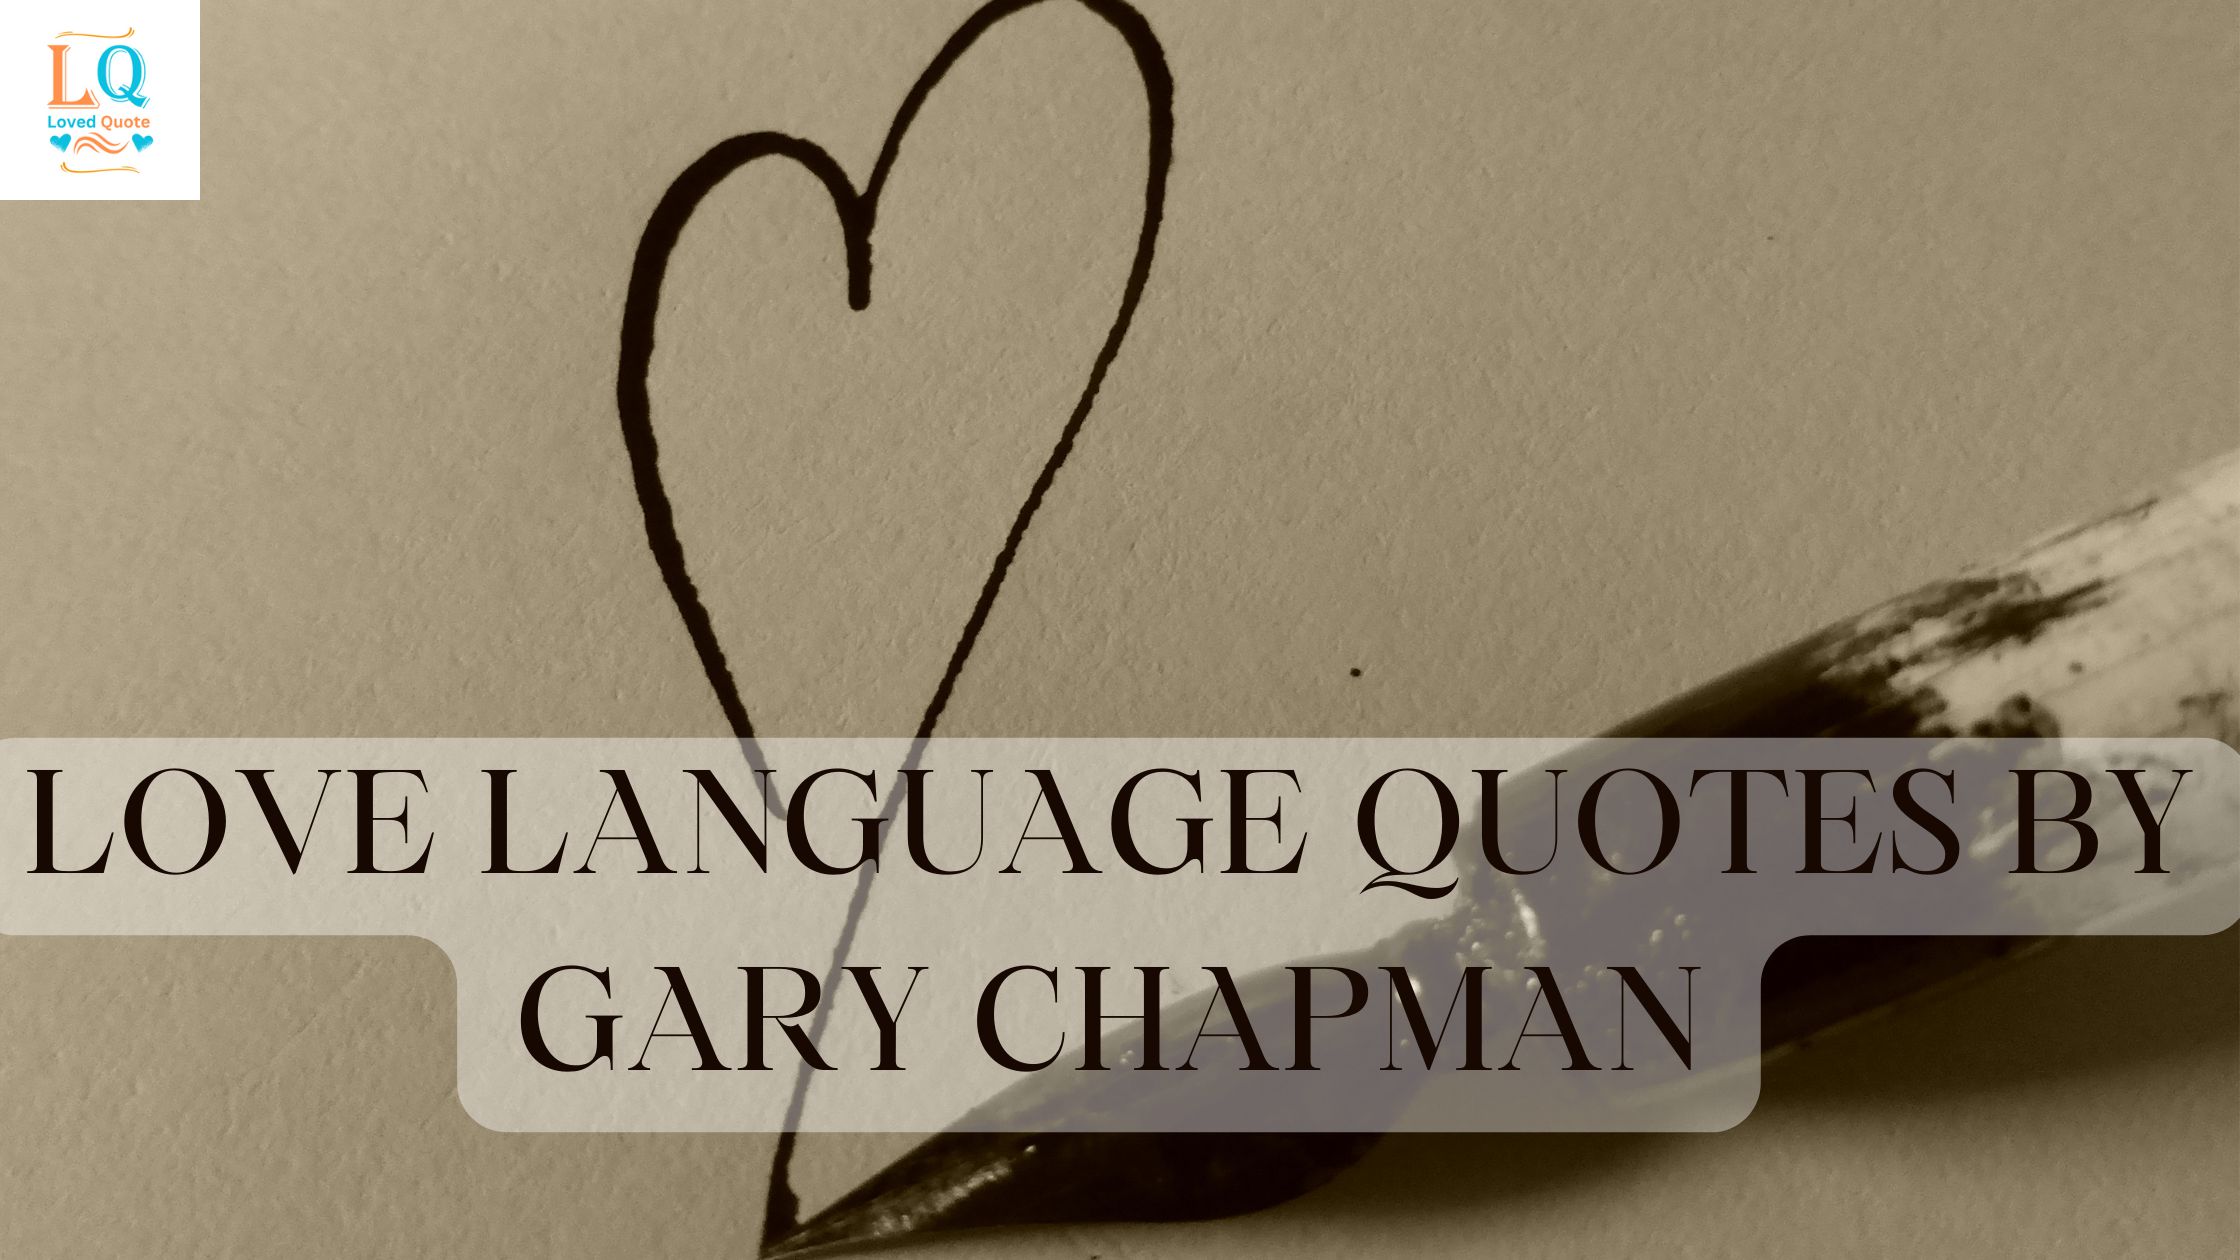 Love Language Quotes by Gary Chapman